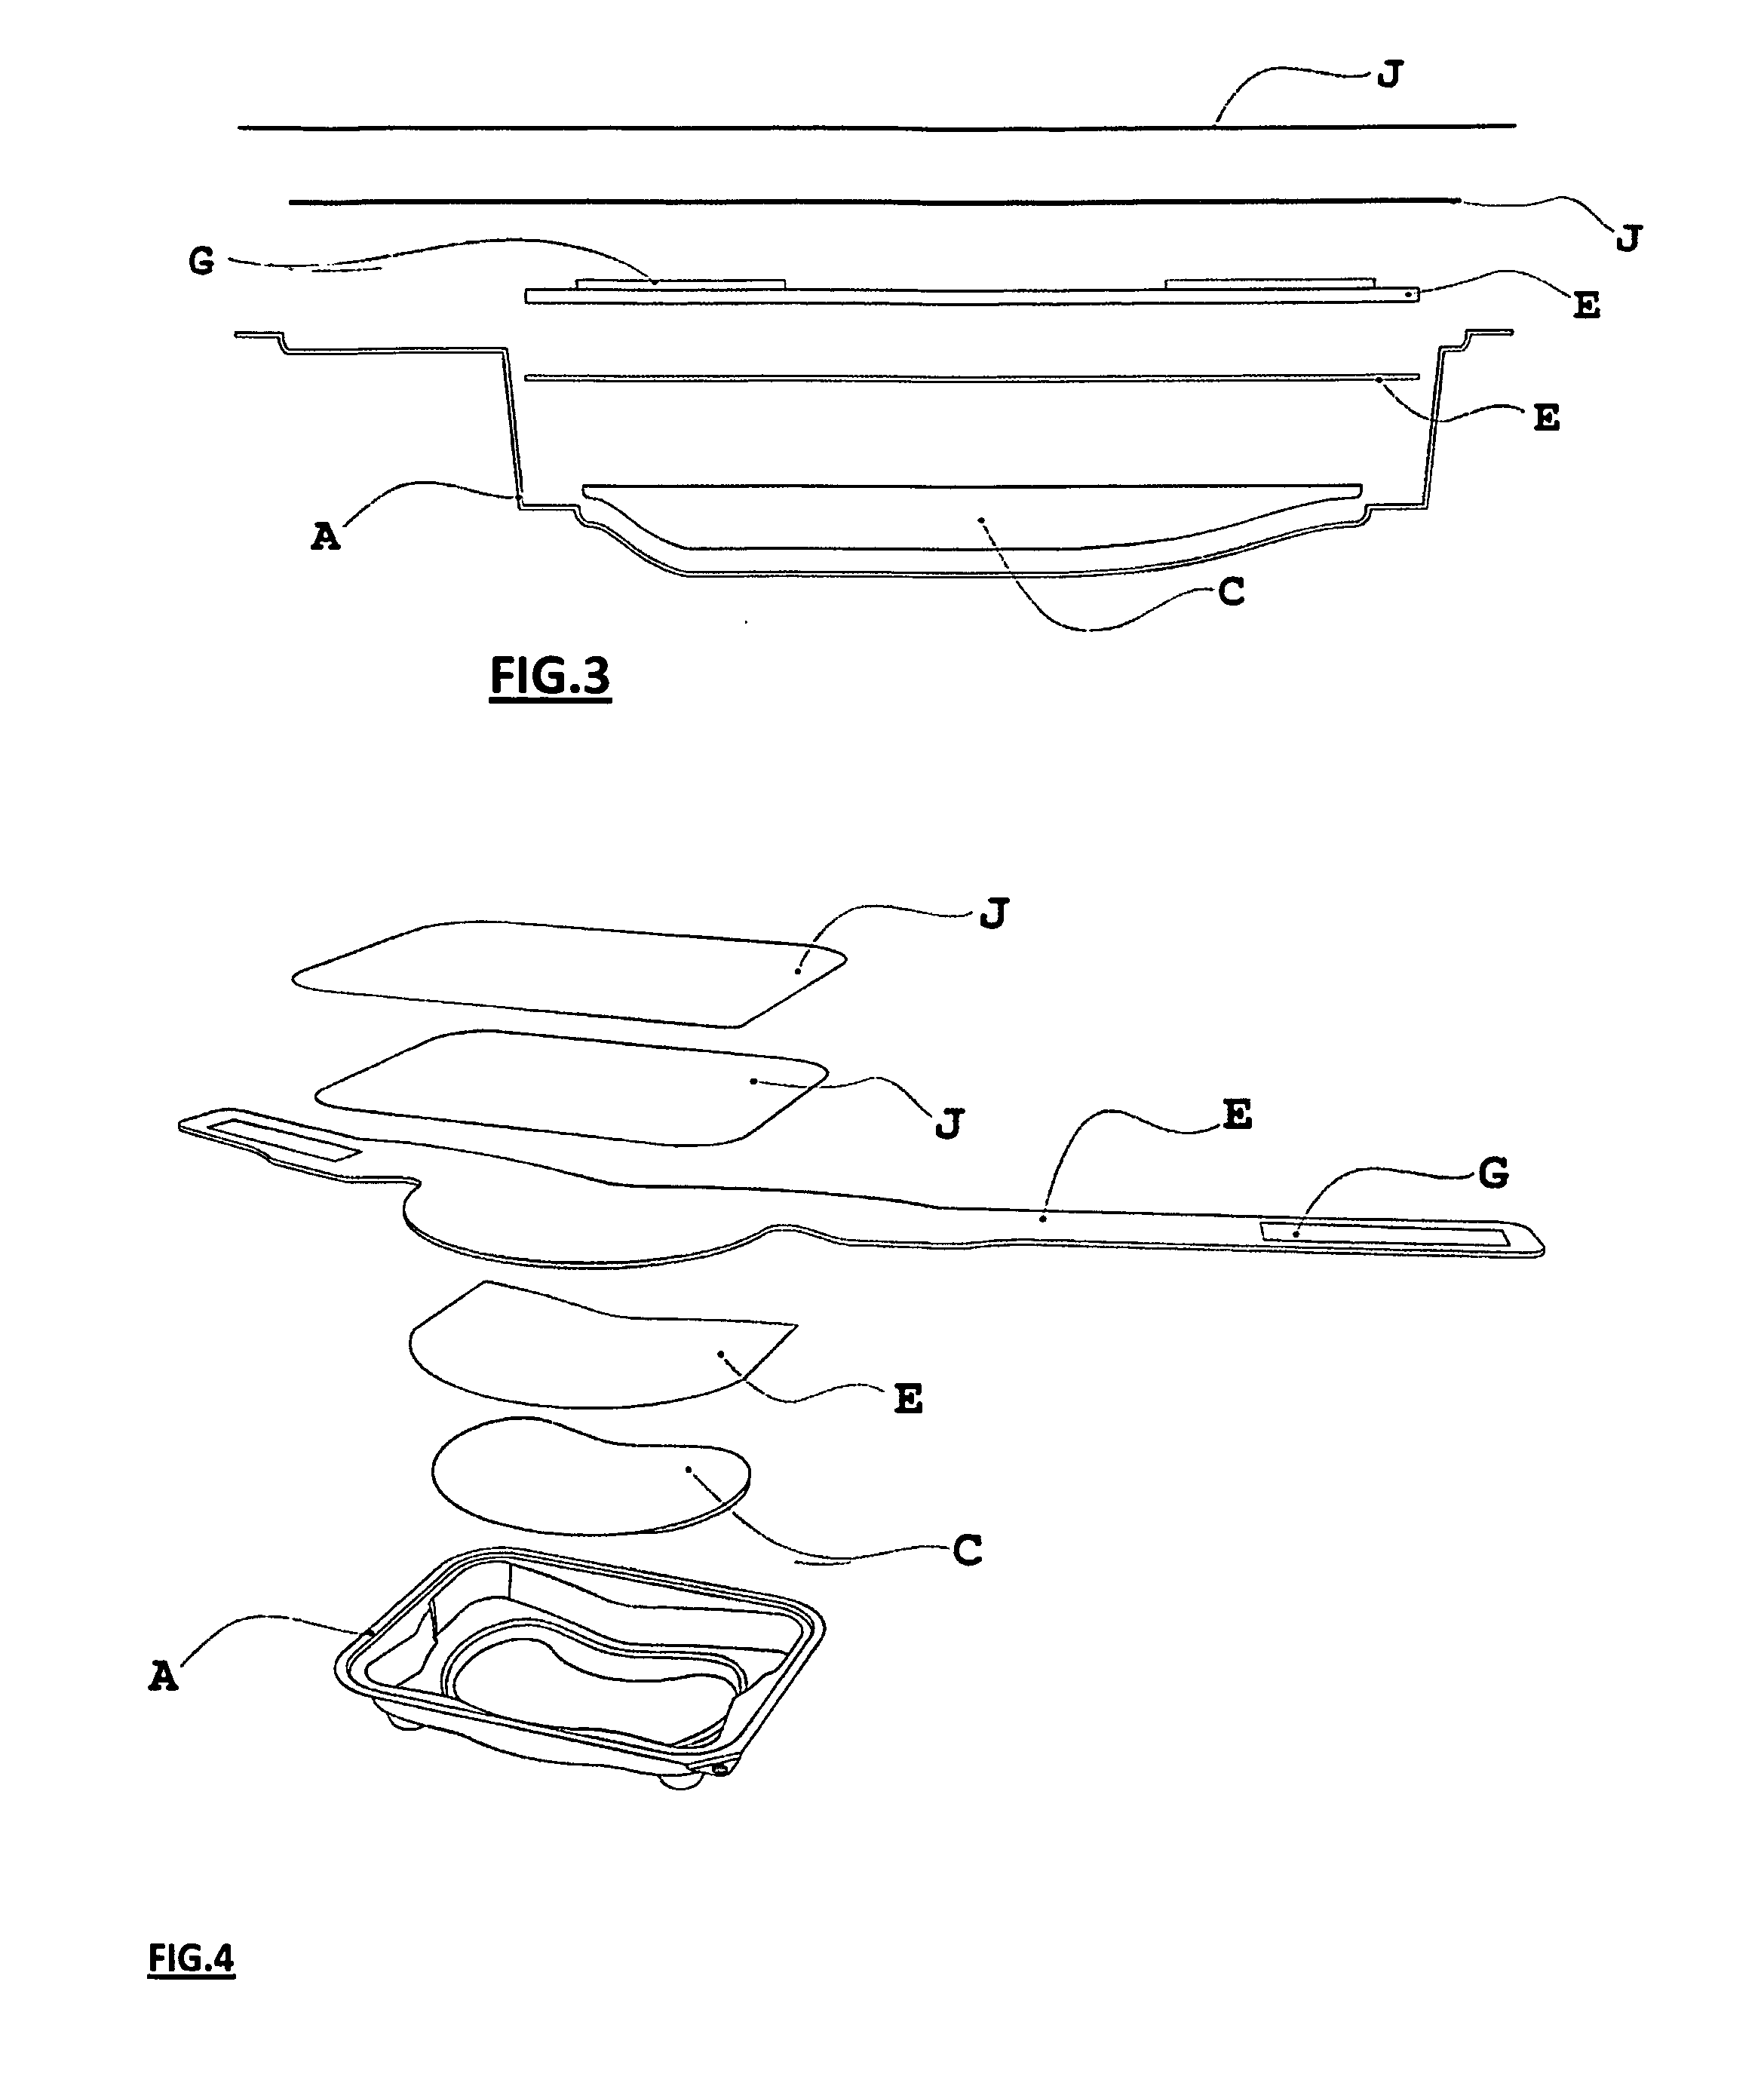 Radiation protection device